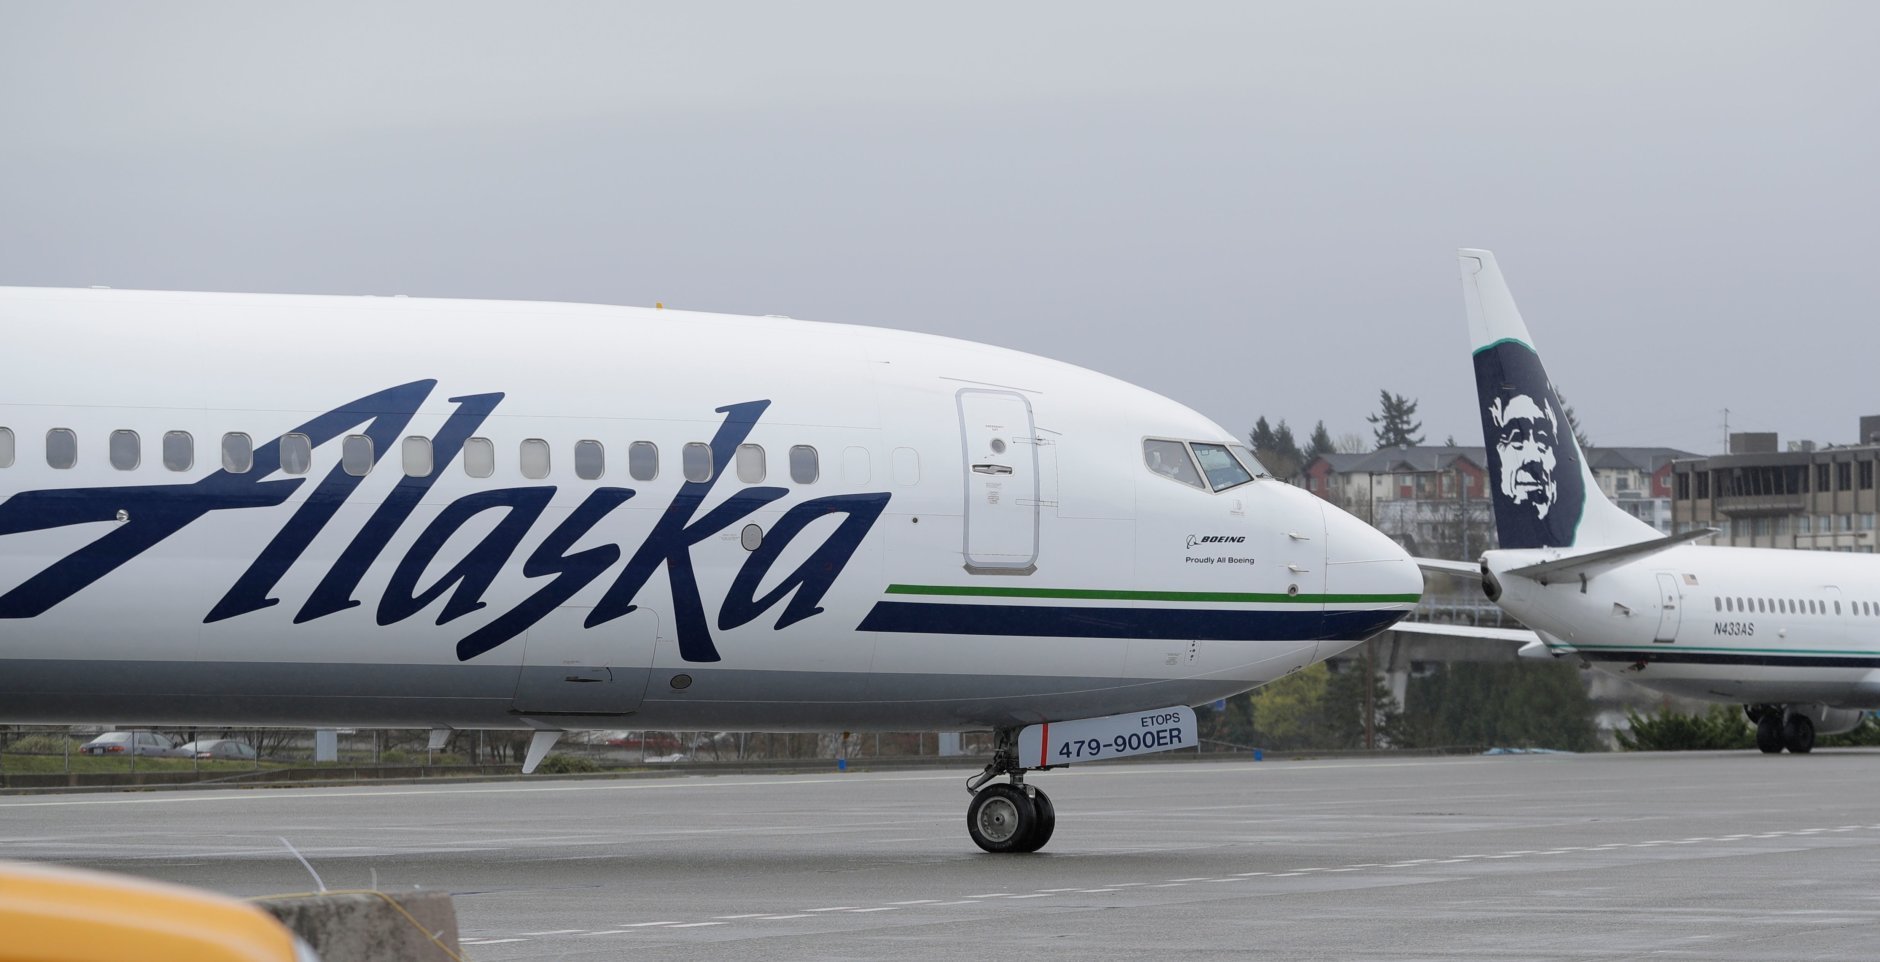 An Alaska Airlines plane taxis Friday, April 13, 2018, at the Seattle-Tacoma International Airport in Seattle. (AP Photo/Ted S. Warren)